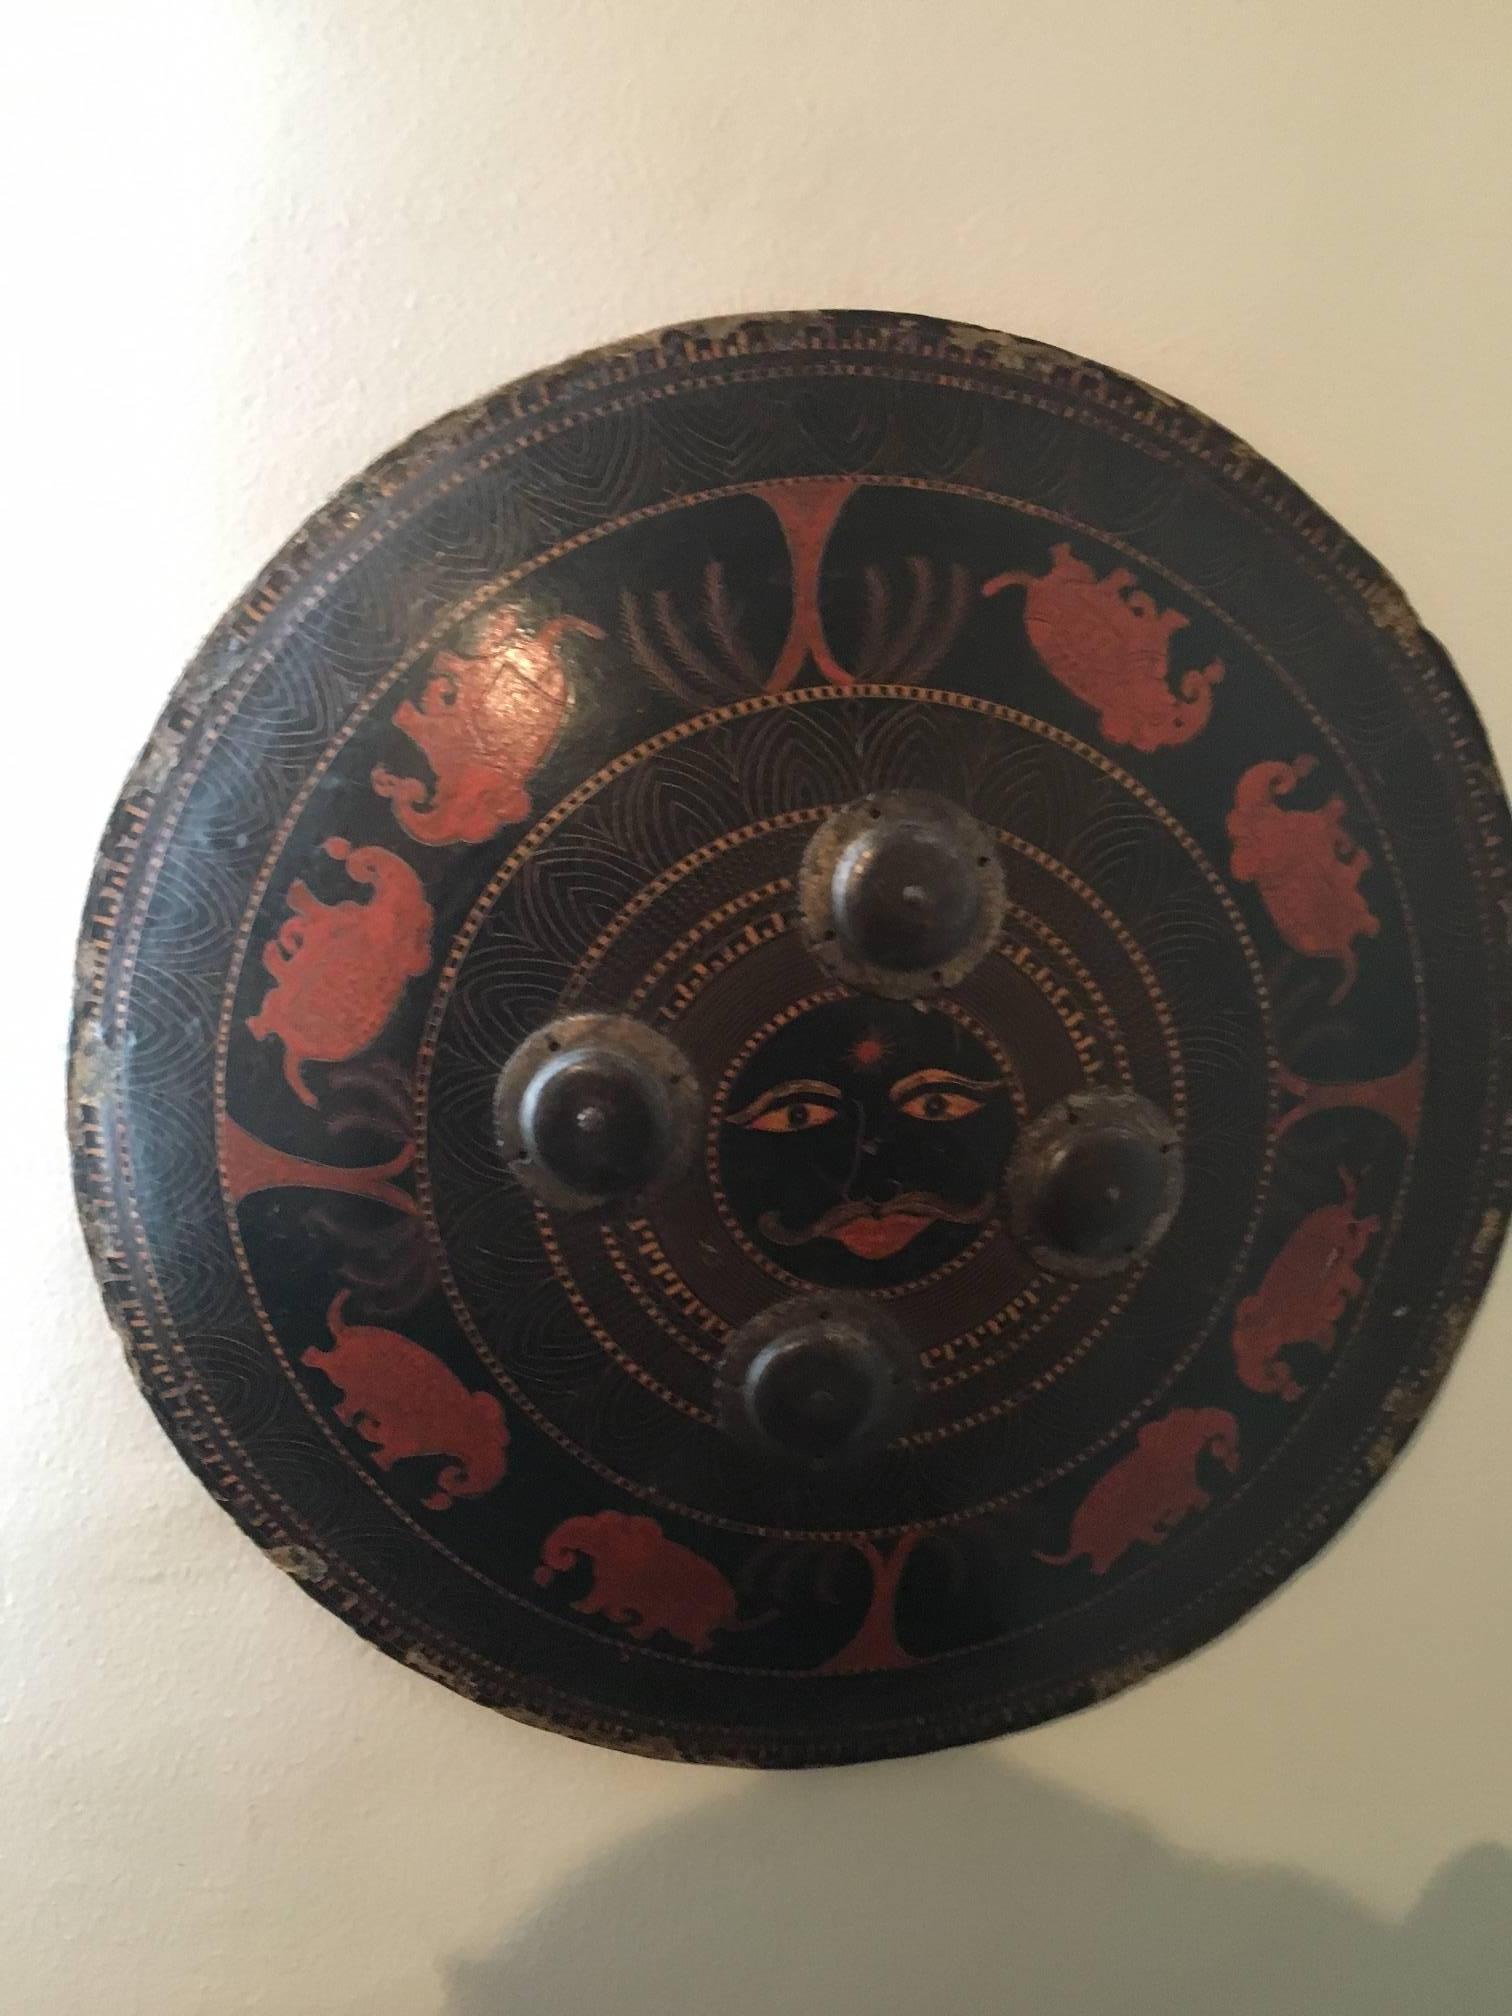 19th century Indian shield representing some elephants and a face in the middle.